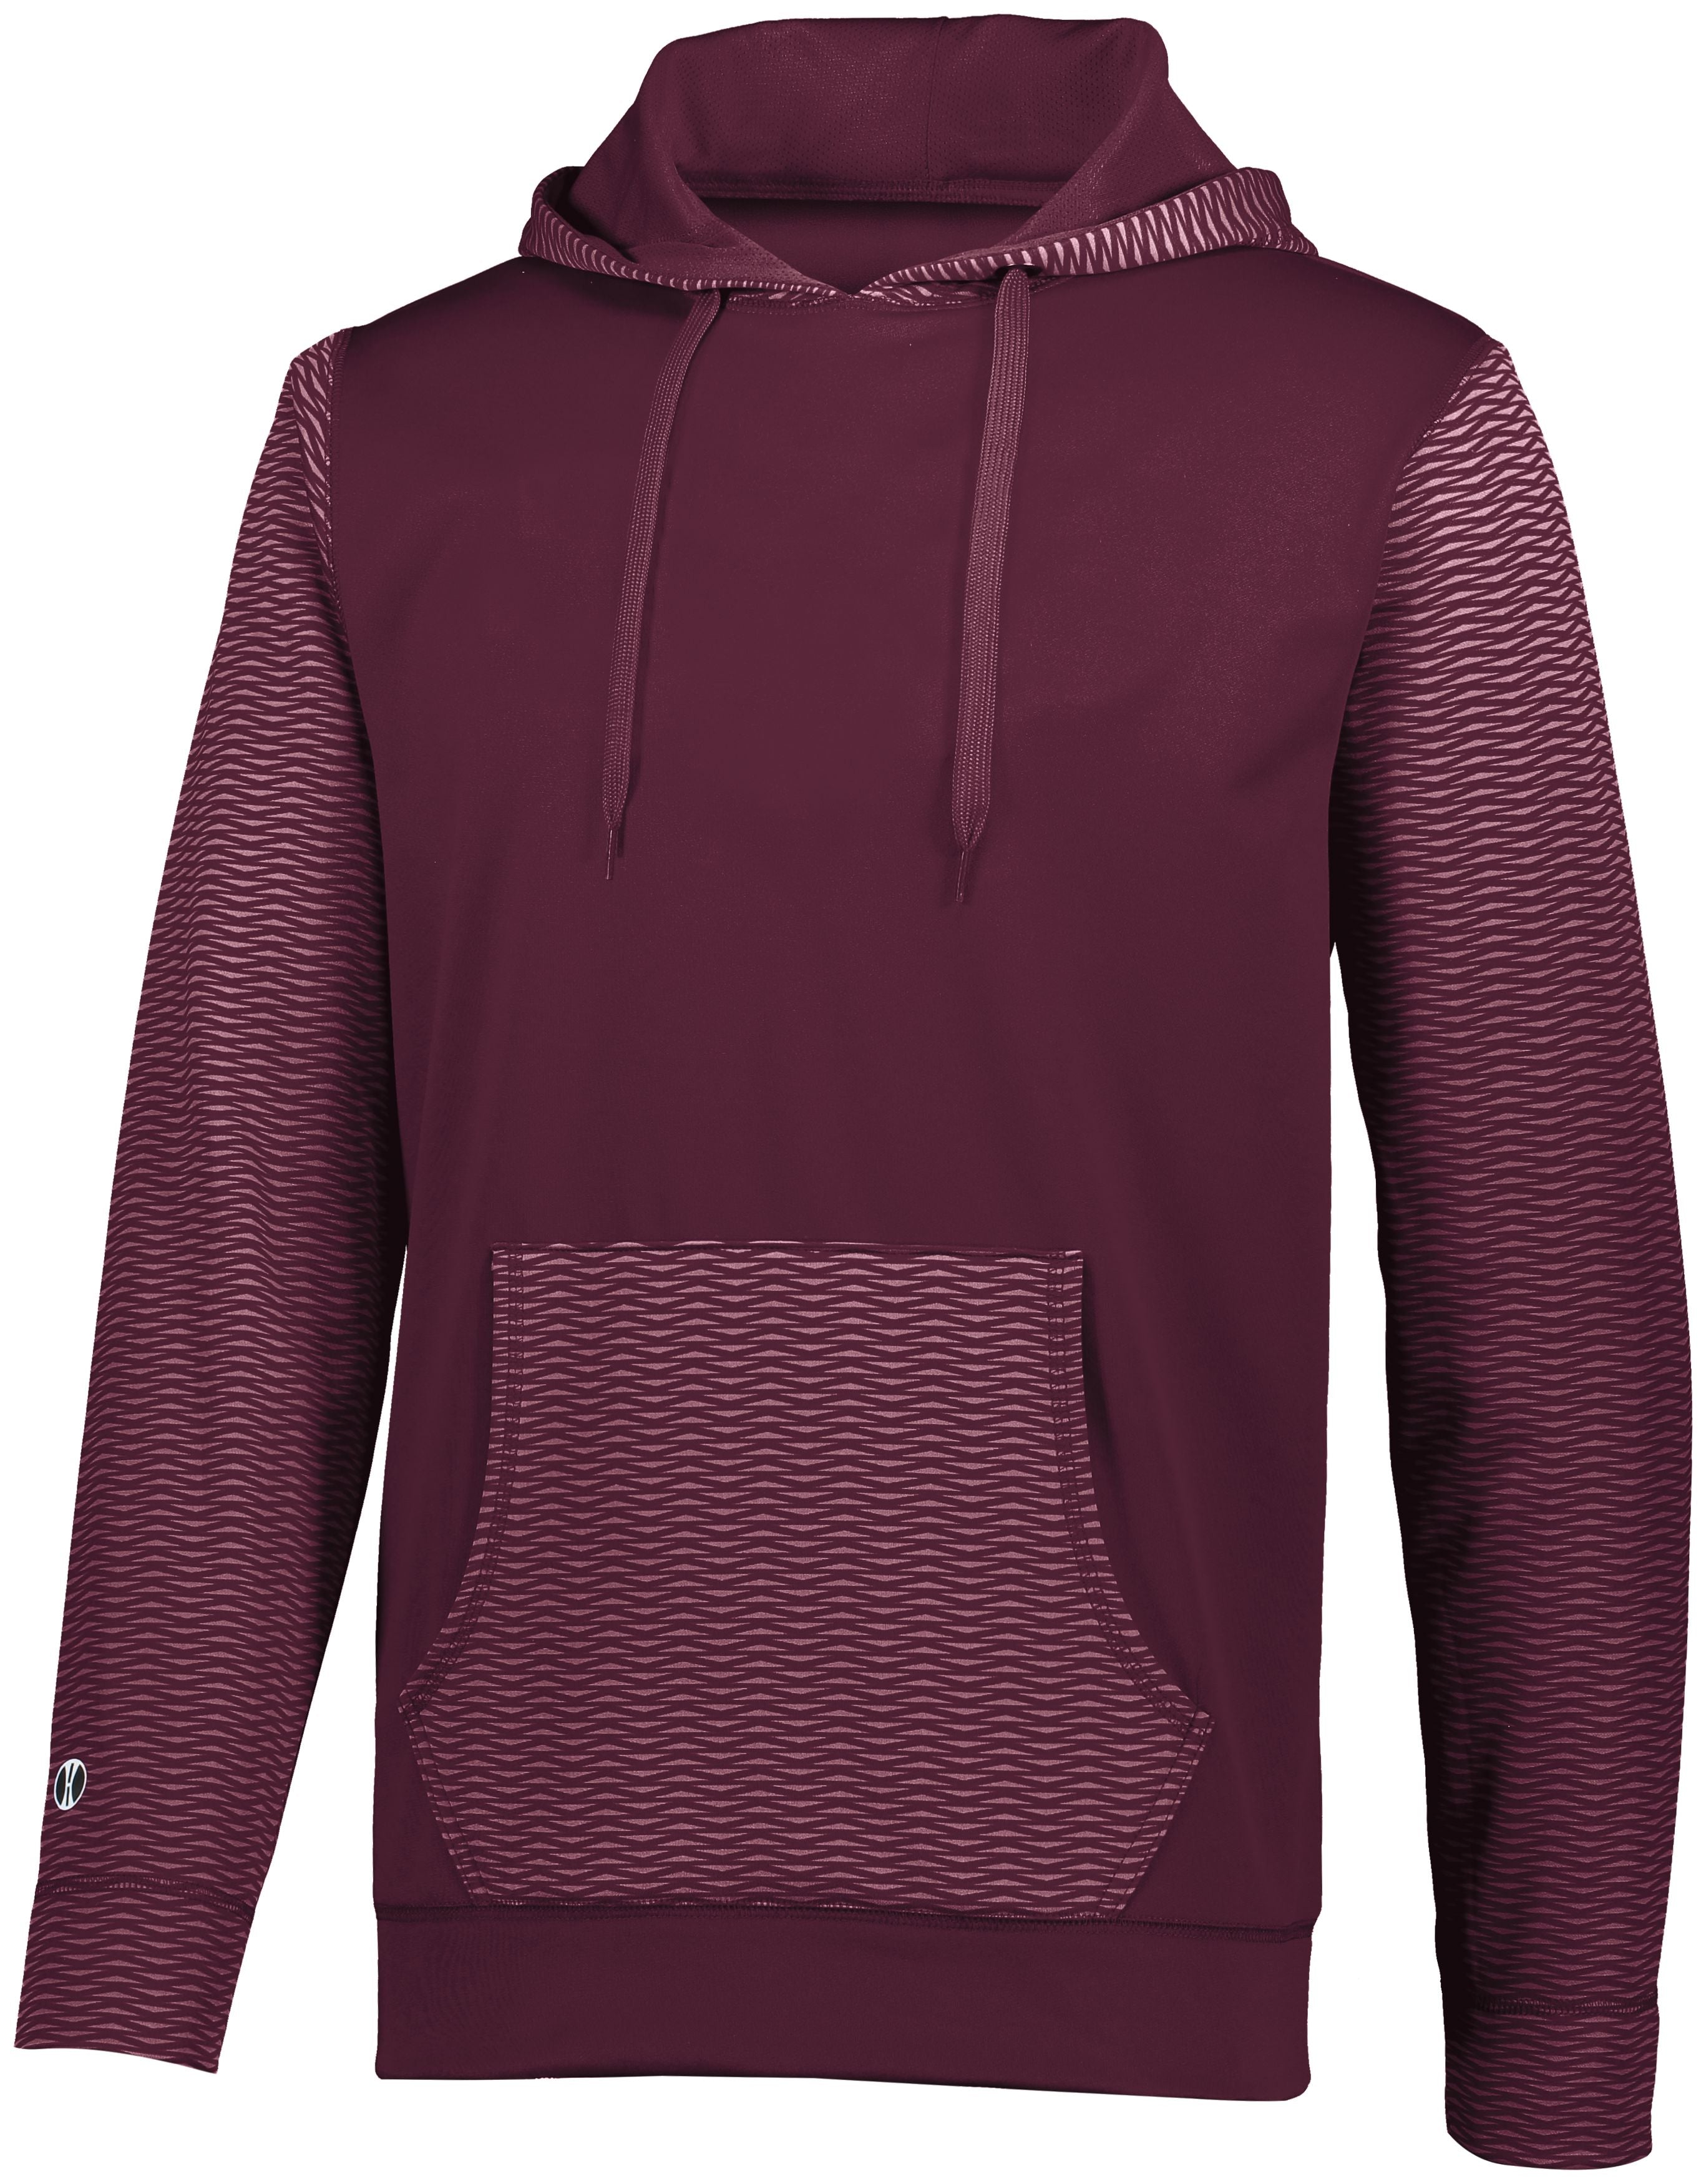 Holloway Range Hoodie in Maroon  -Part of the Adult, Adult-Hoodie, Hoodies, Holloway, Range-Collection product lines at KanaleyCreations.com